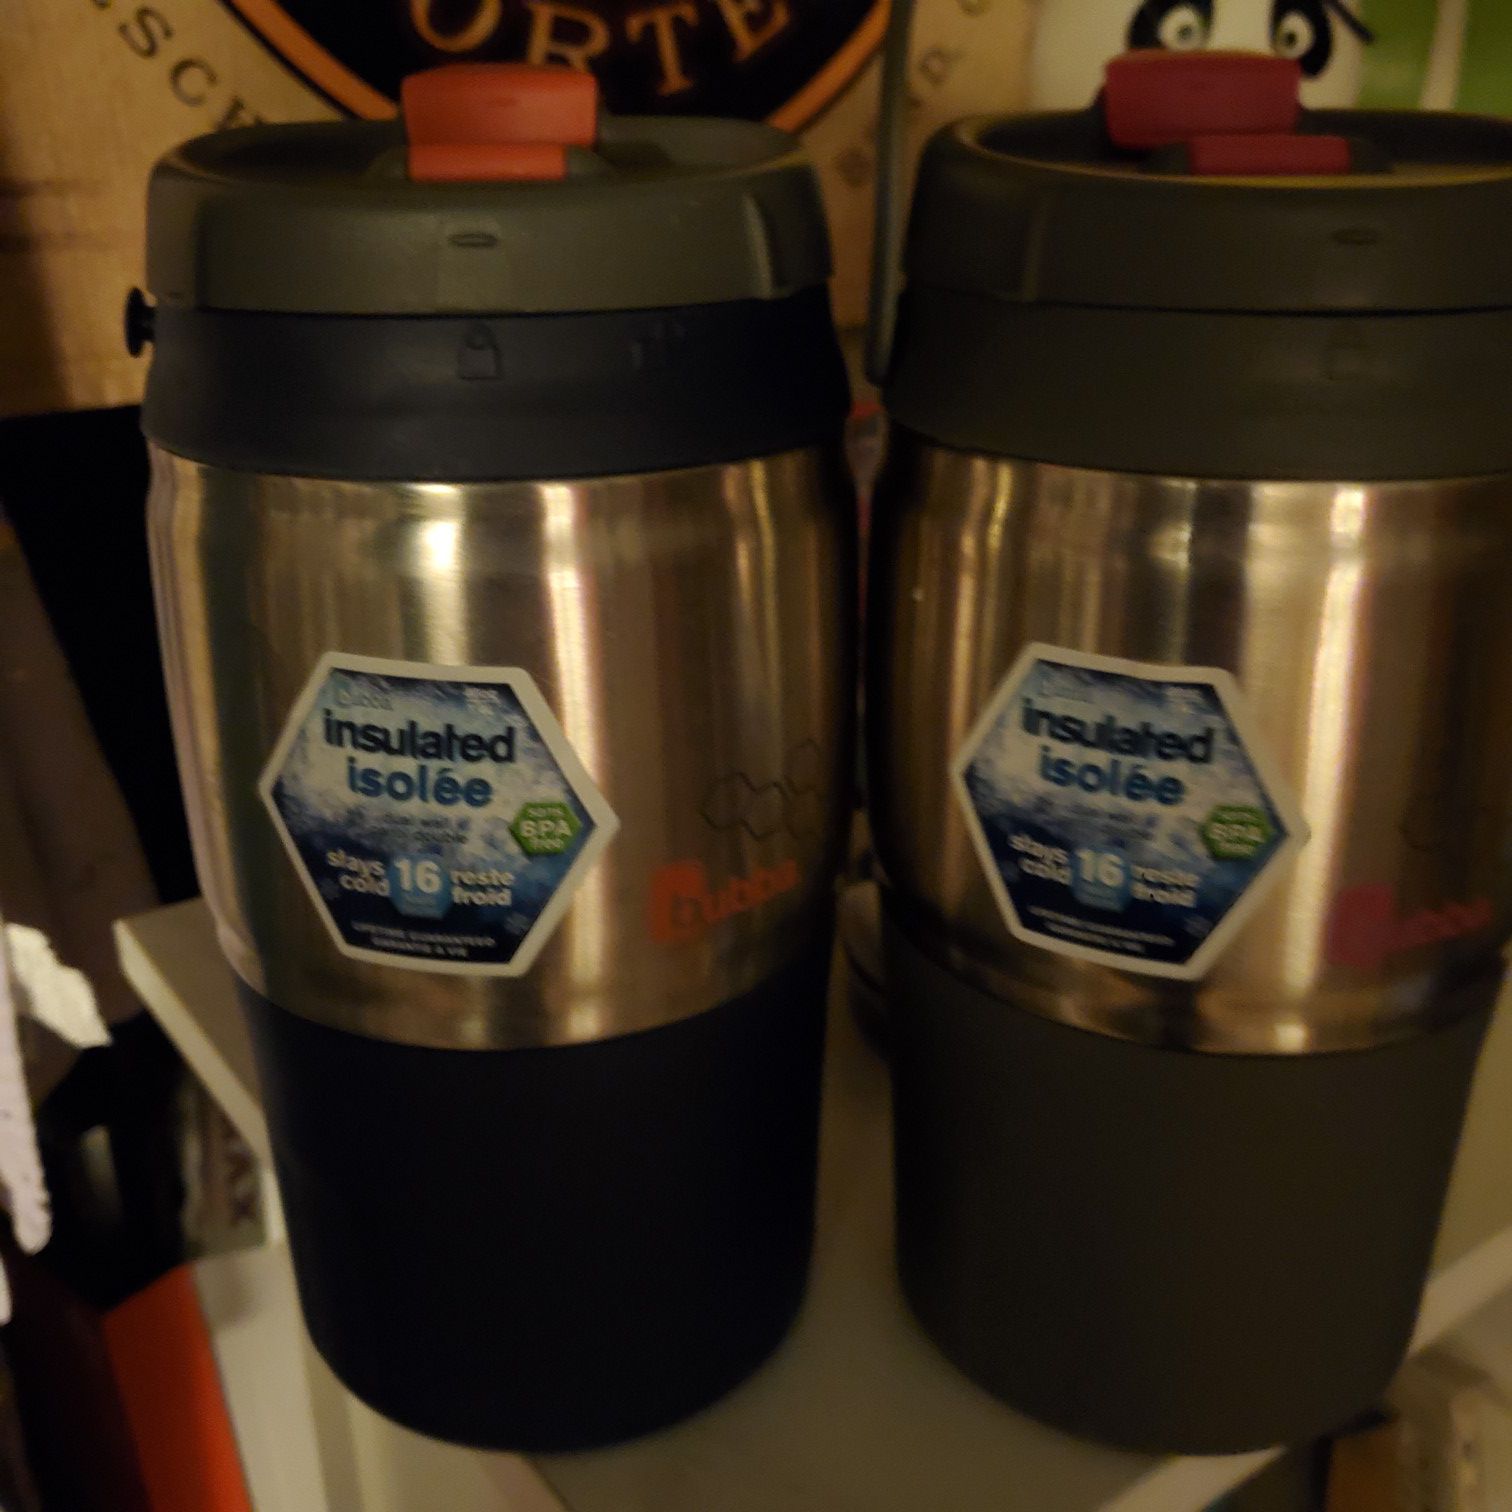 Two Bubba insulated isolee cup/thermos